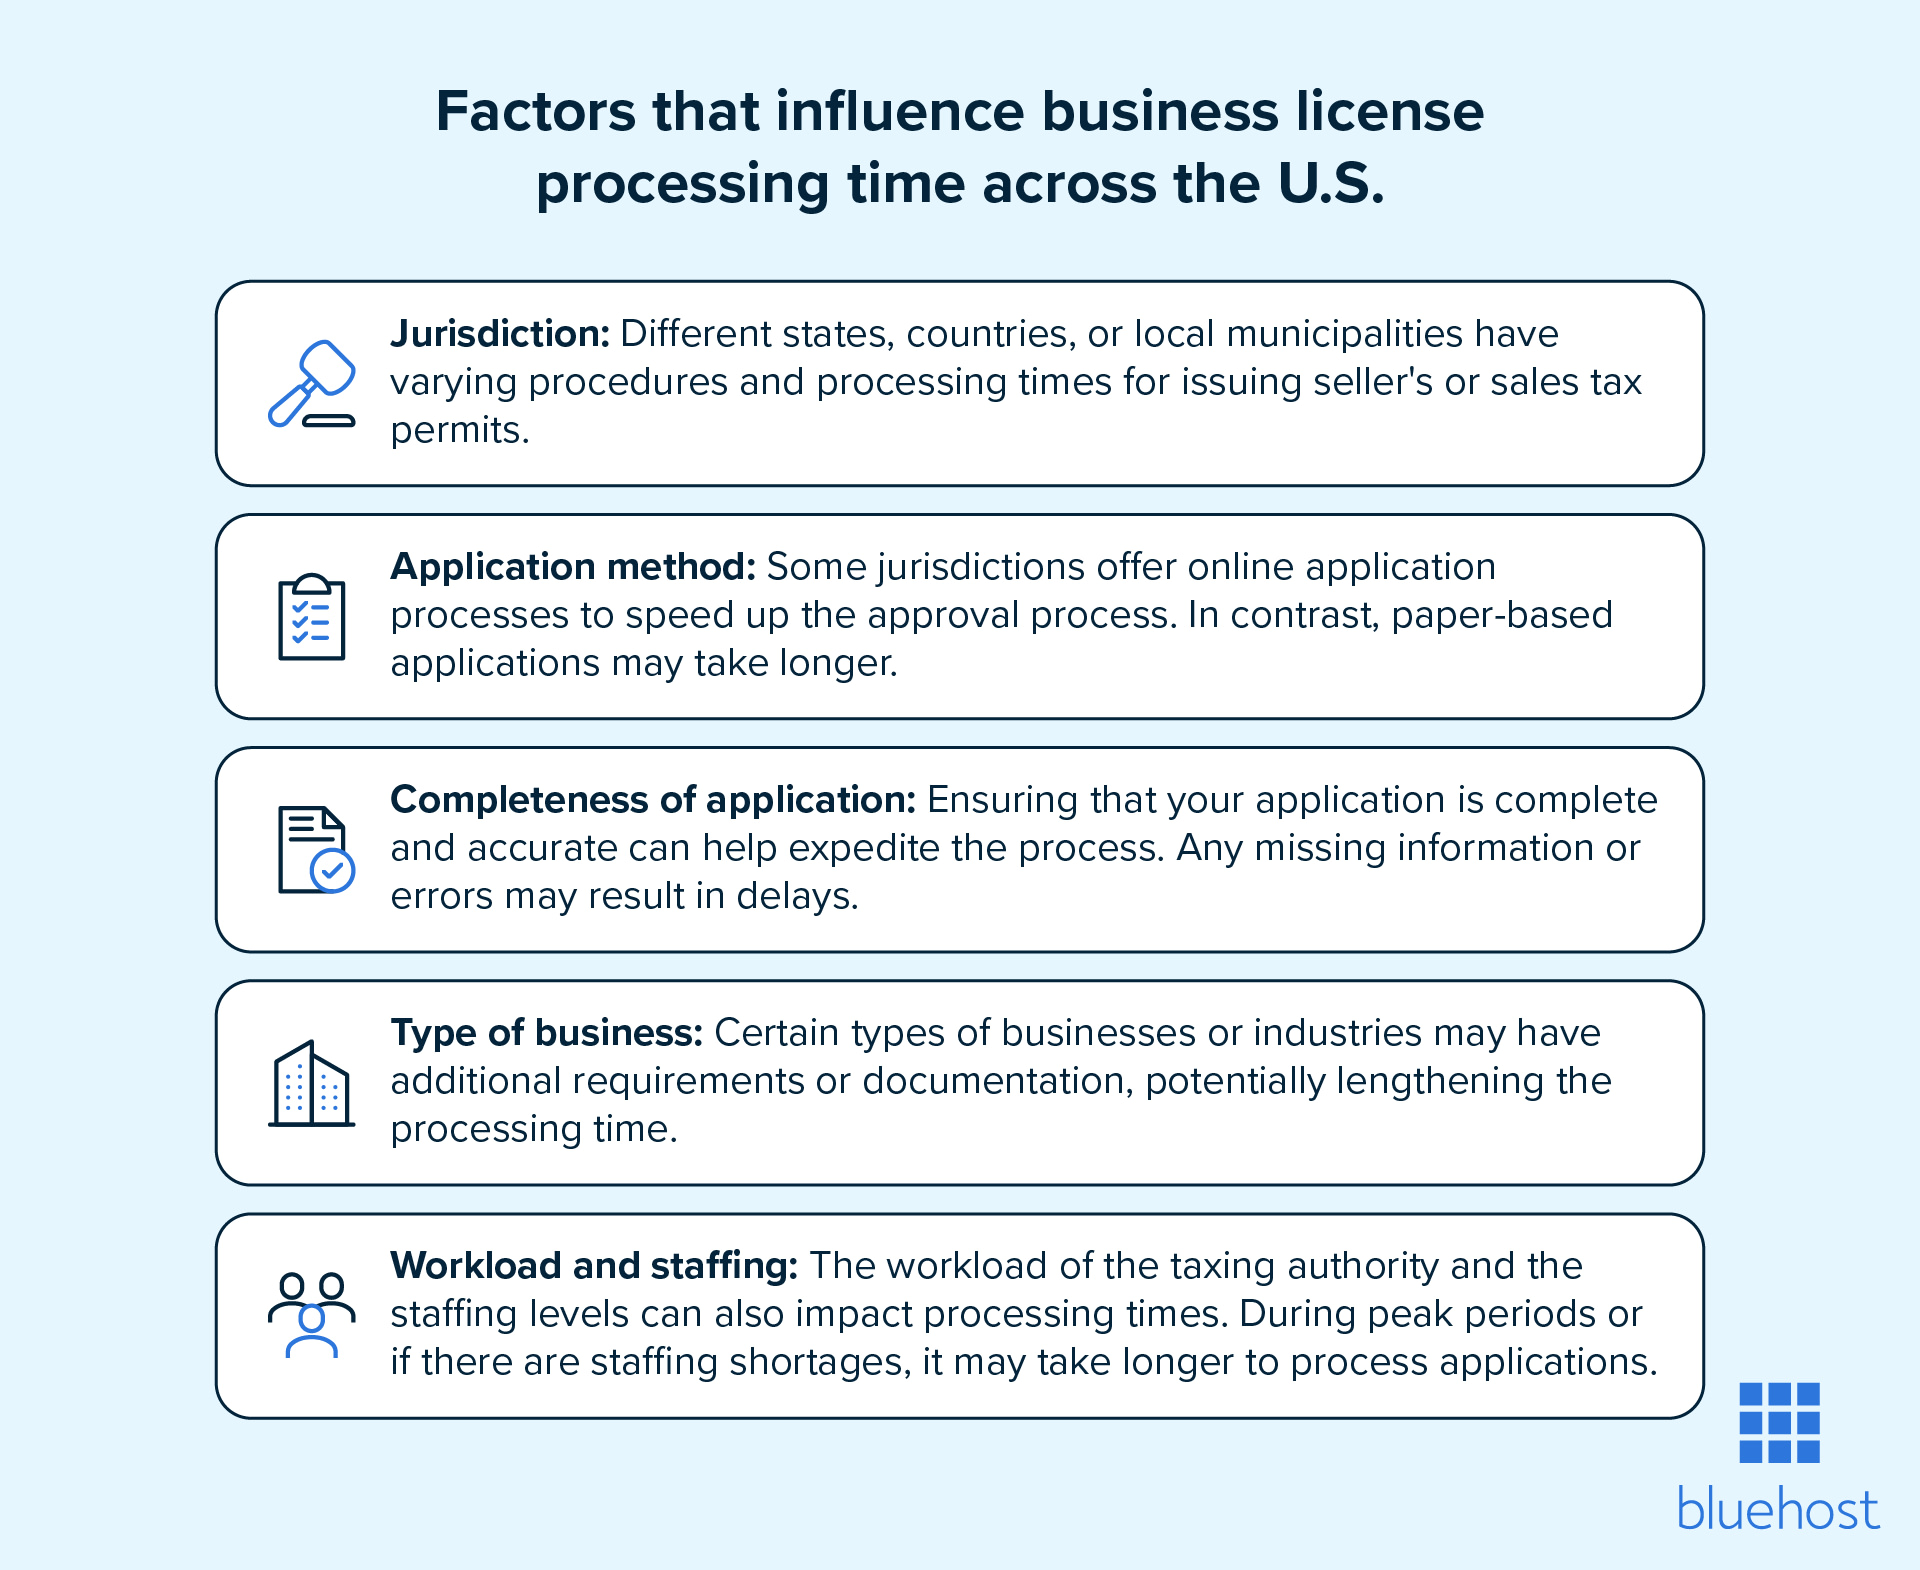 Factors that influence the processing time of business licenses across states in the U.S.